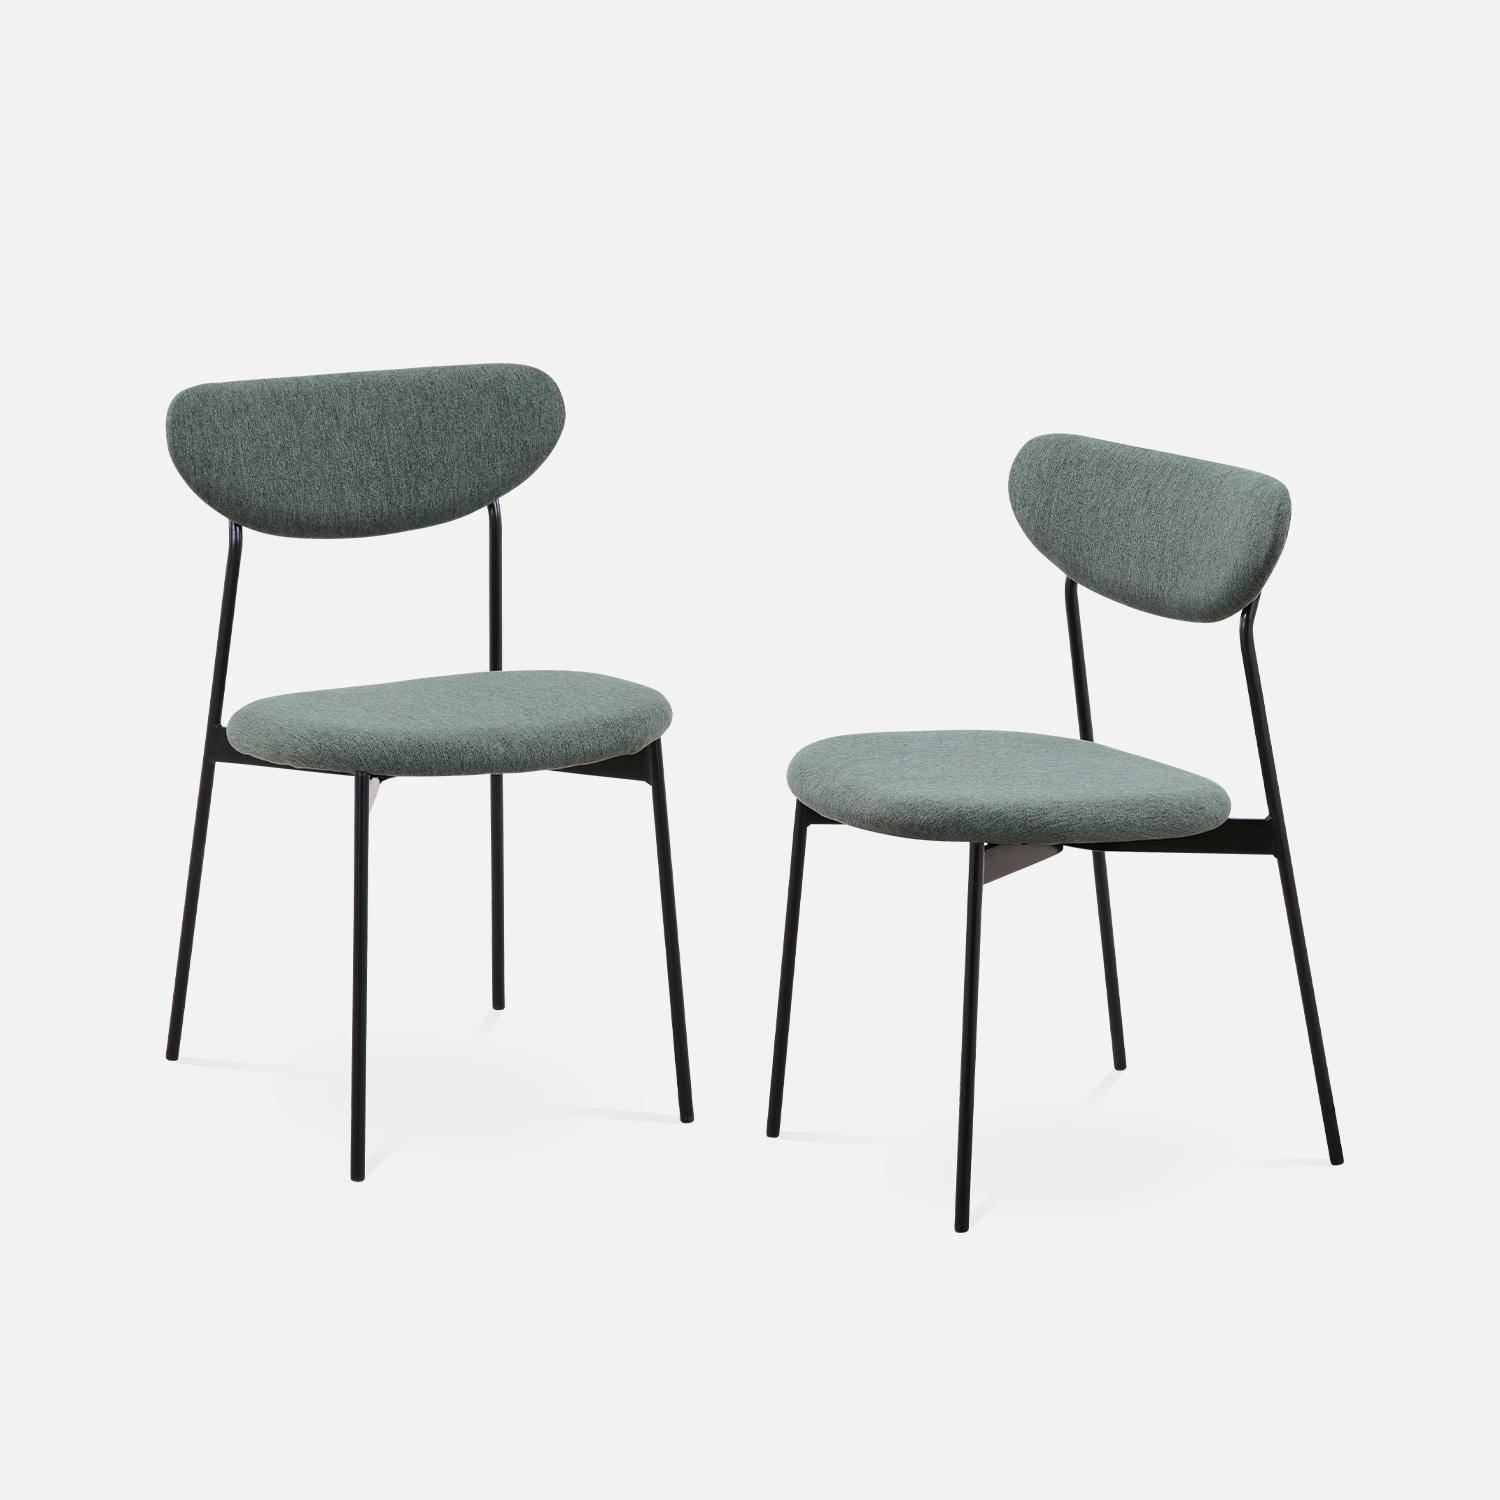 Set of 2 retro style dining chairs with steel legs - Arty - Green Photo3